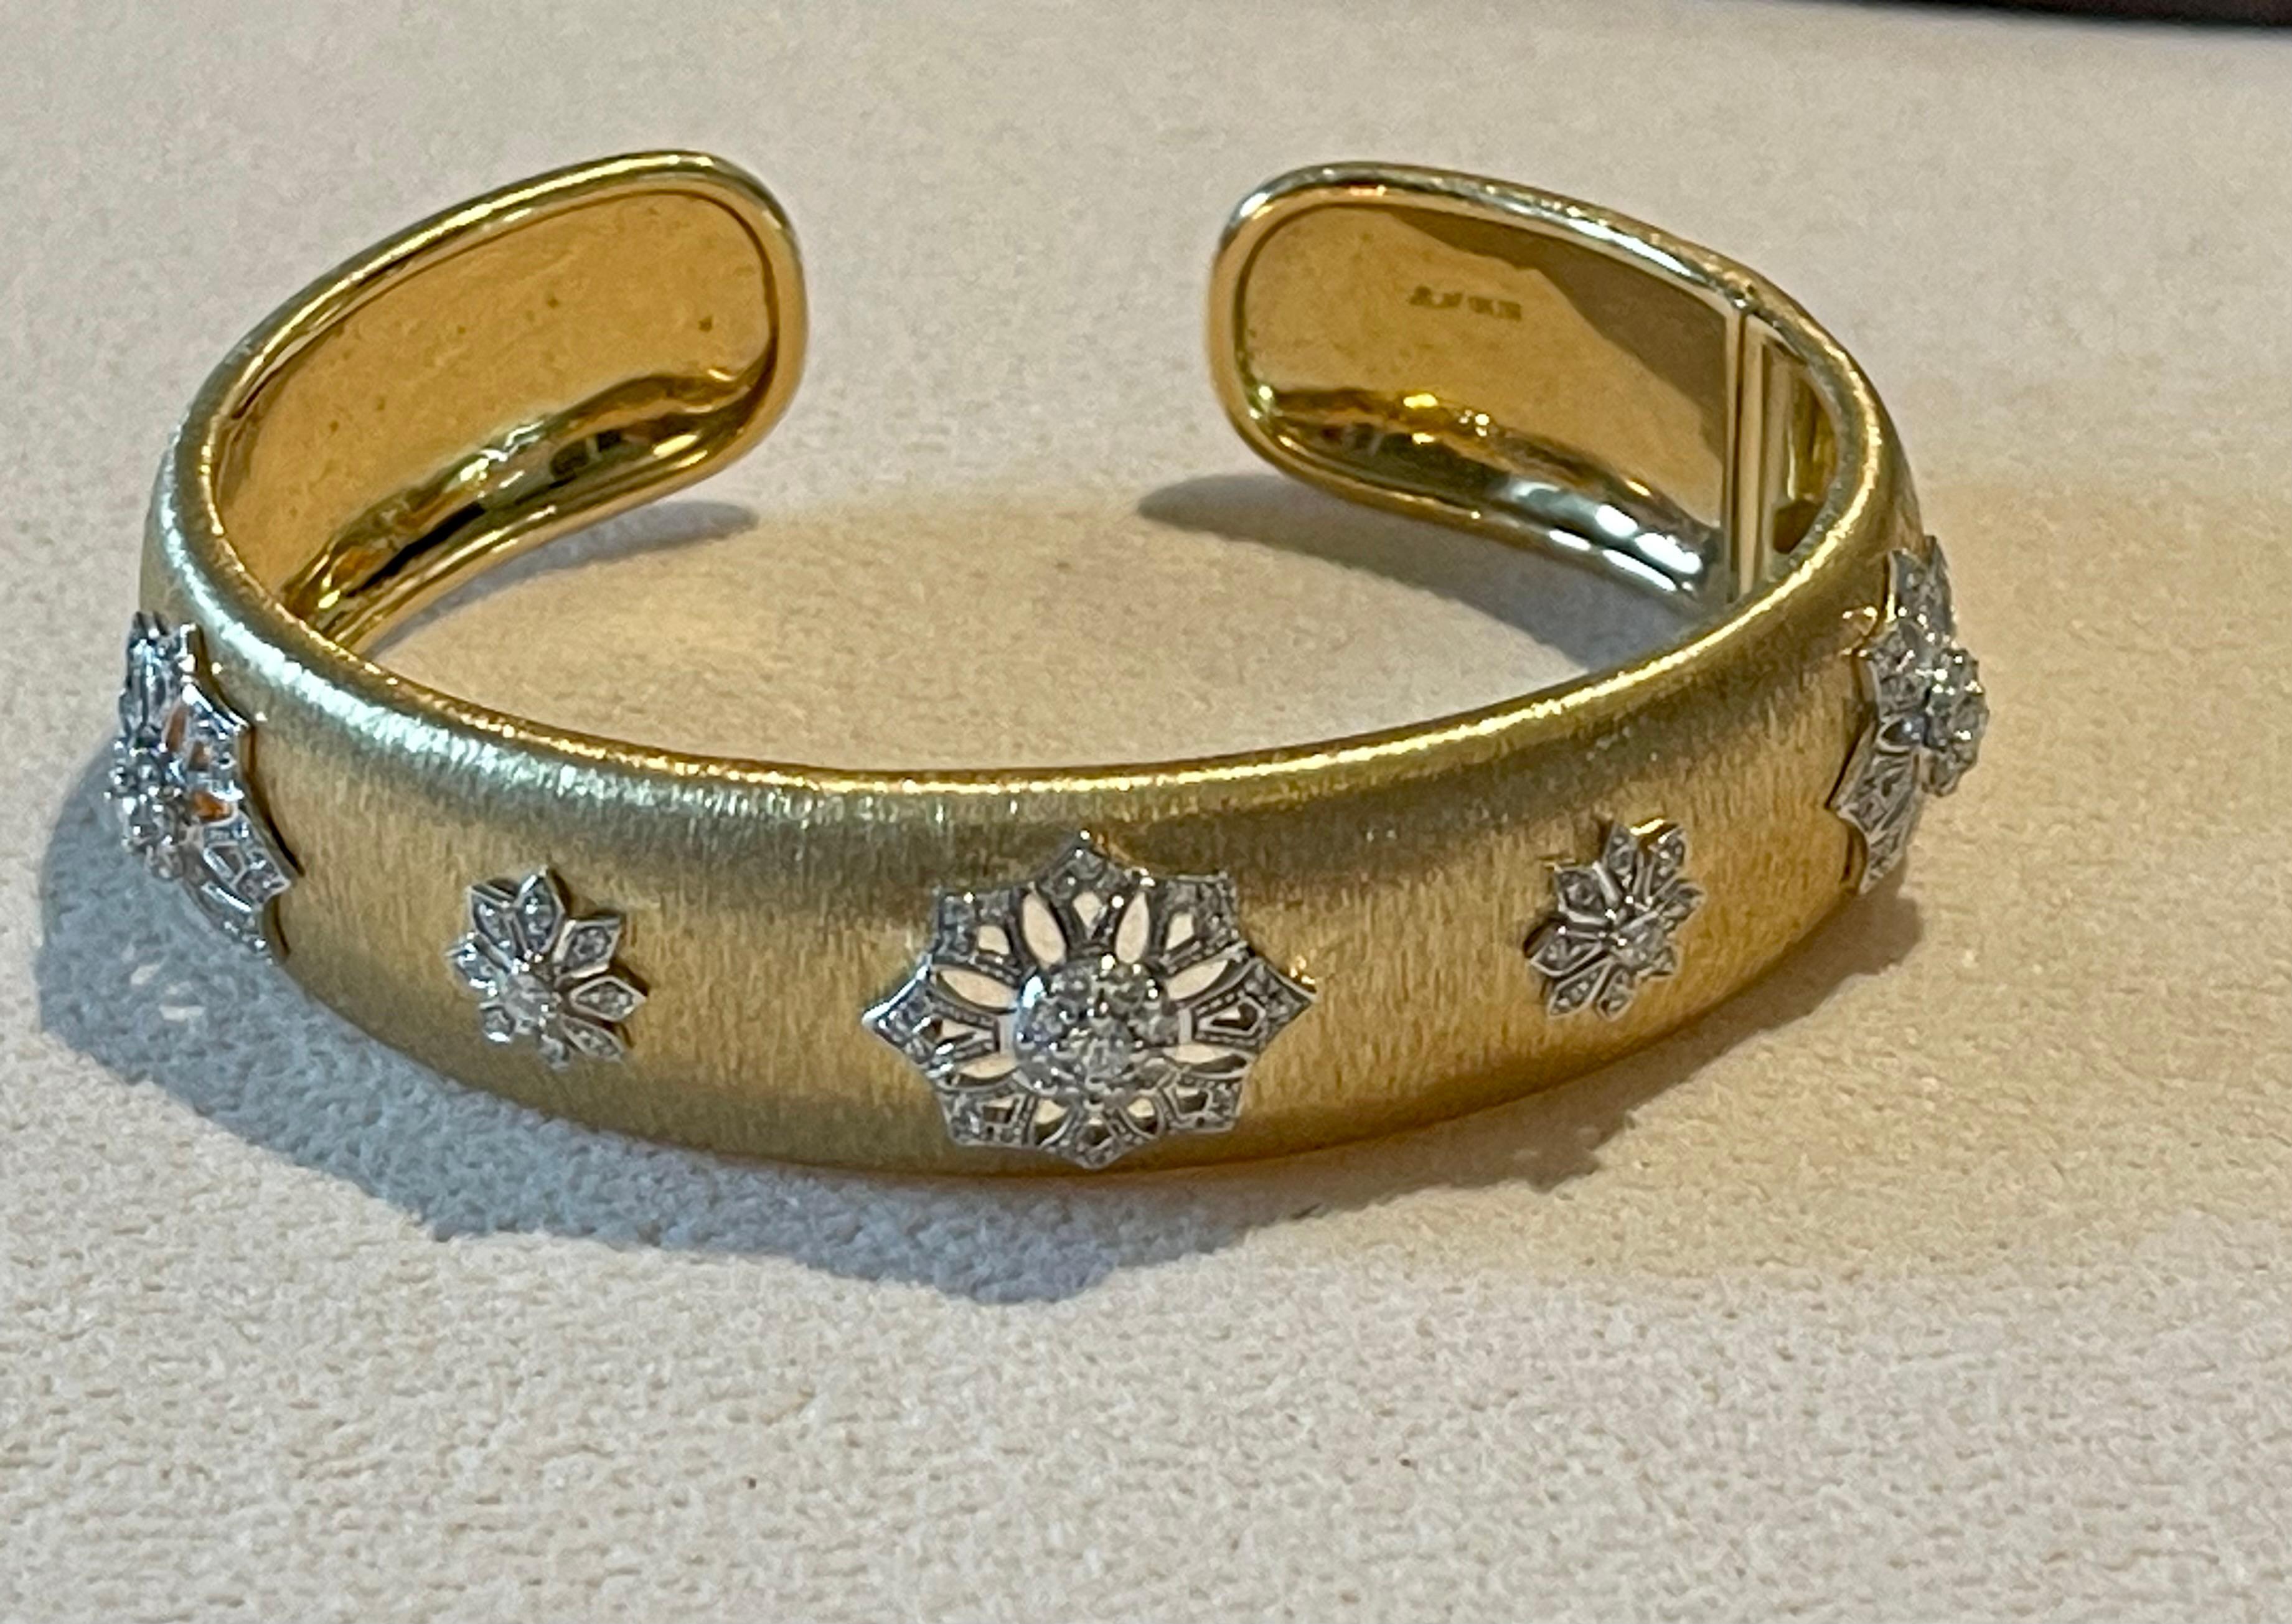 Featuirng a stunning open cuff silhouette in textured 18 K yellow  and white Gold .
This 15 mm wide cuff bracelet is made in 18 karats yellow and white gold and engraved using the sophisticated and elaborate engraving technique called ‘Rigato’ for a